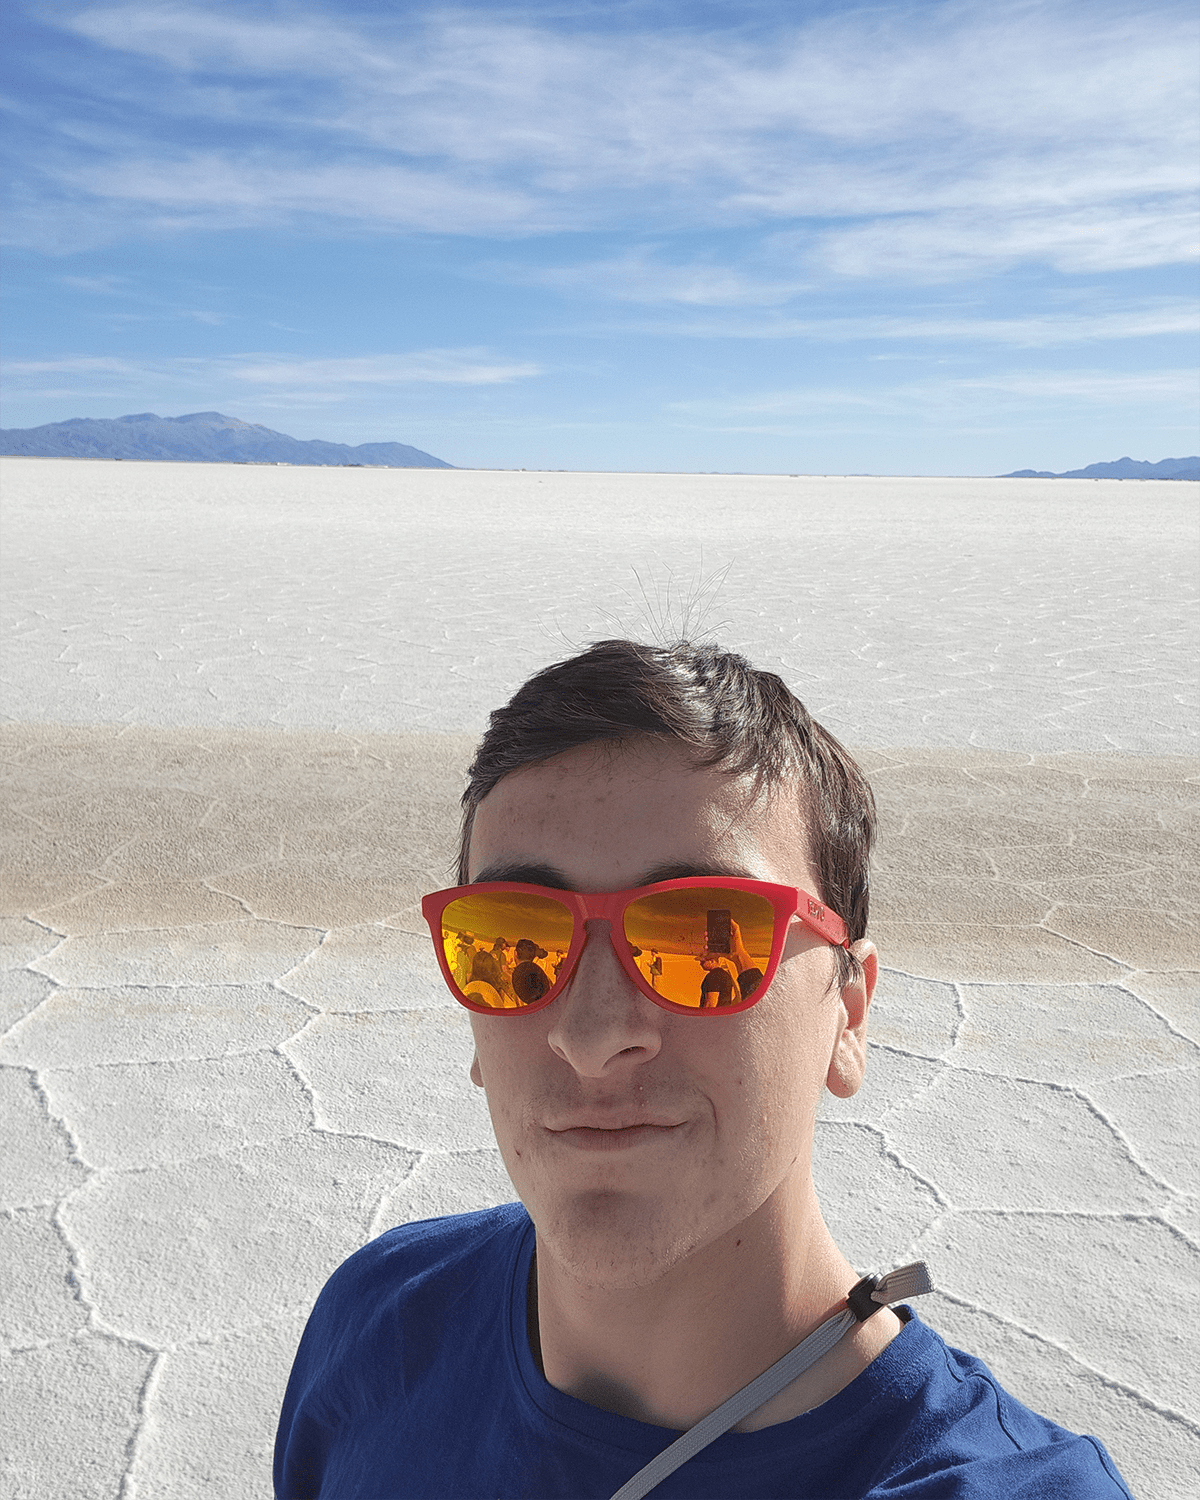 A South American desert plain serves as a backdrop for this selfie from B.S. in Unmanned Systems student Zackrey Schraeder. (Photo: Zackrey Schraeder)